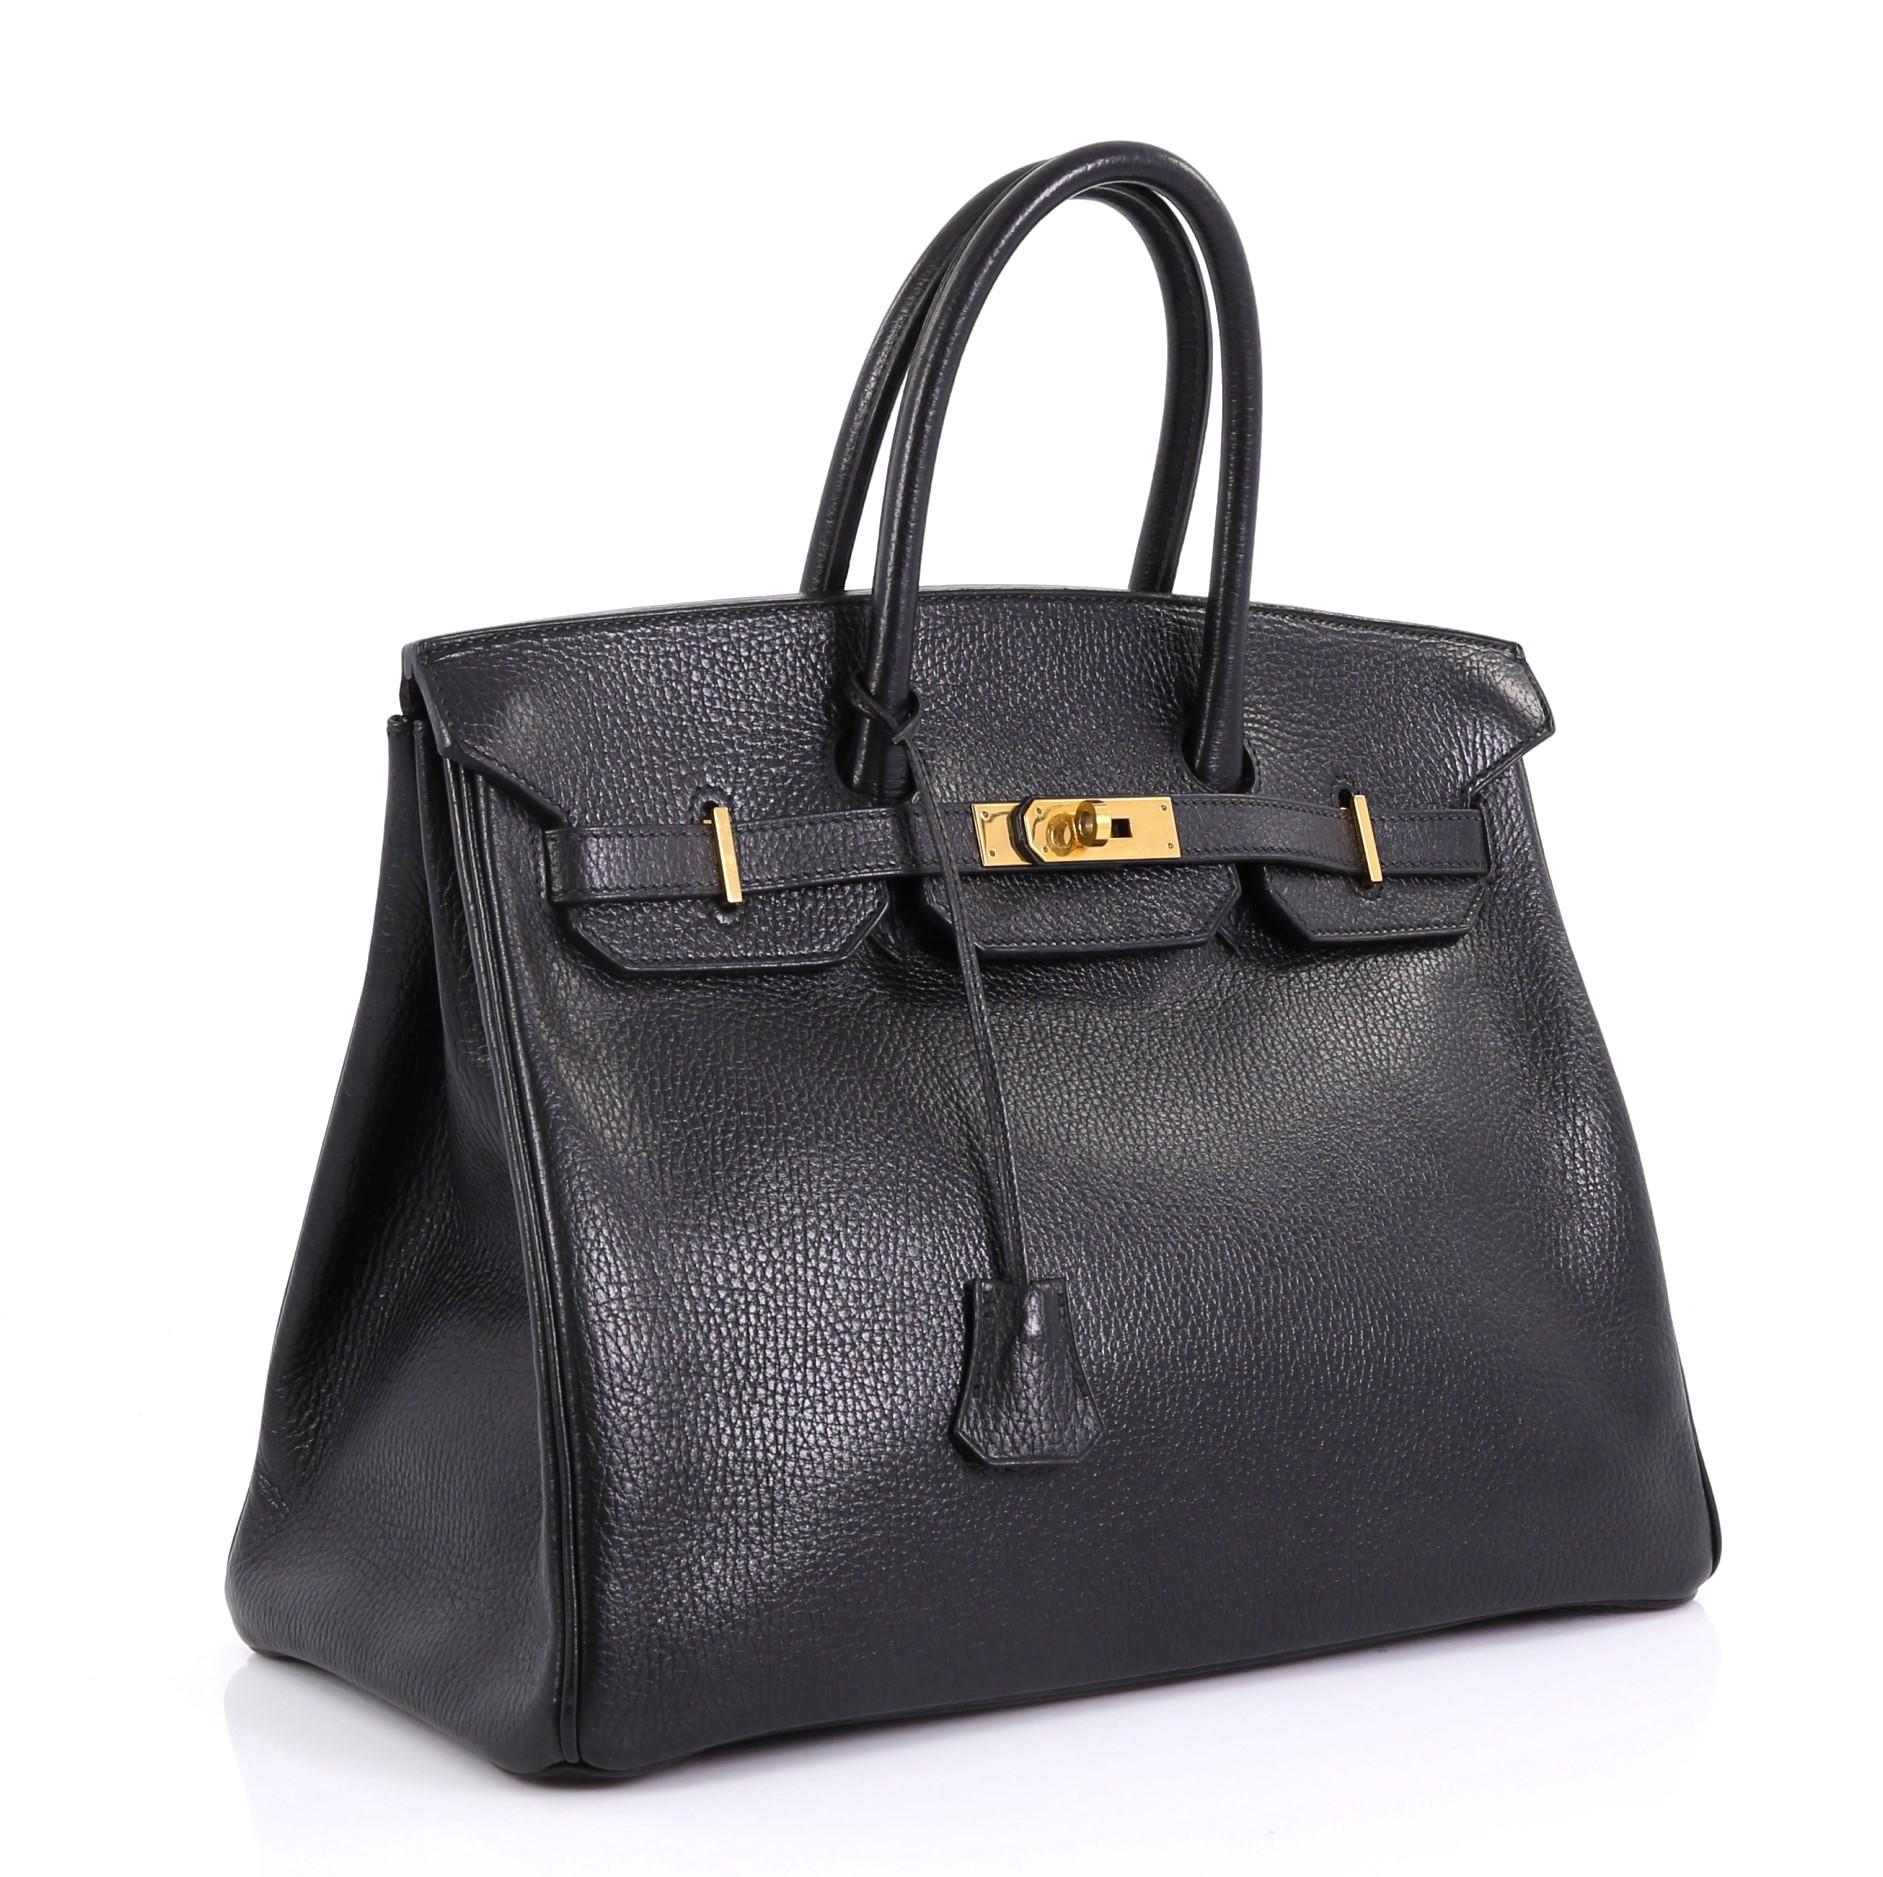 This Hermes Birkin Handbag Noir Ardennes with Gold Hardware 35, crafted in Noir black Ardennes leather, features dual rolled handles, frontal flap, and gold hardware. Its turn-lock closure opens to a Noir black Chevre leather interior with slip